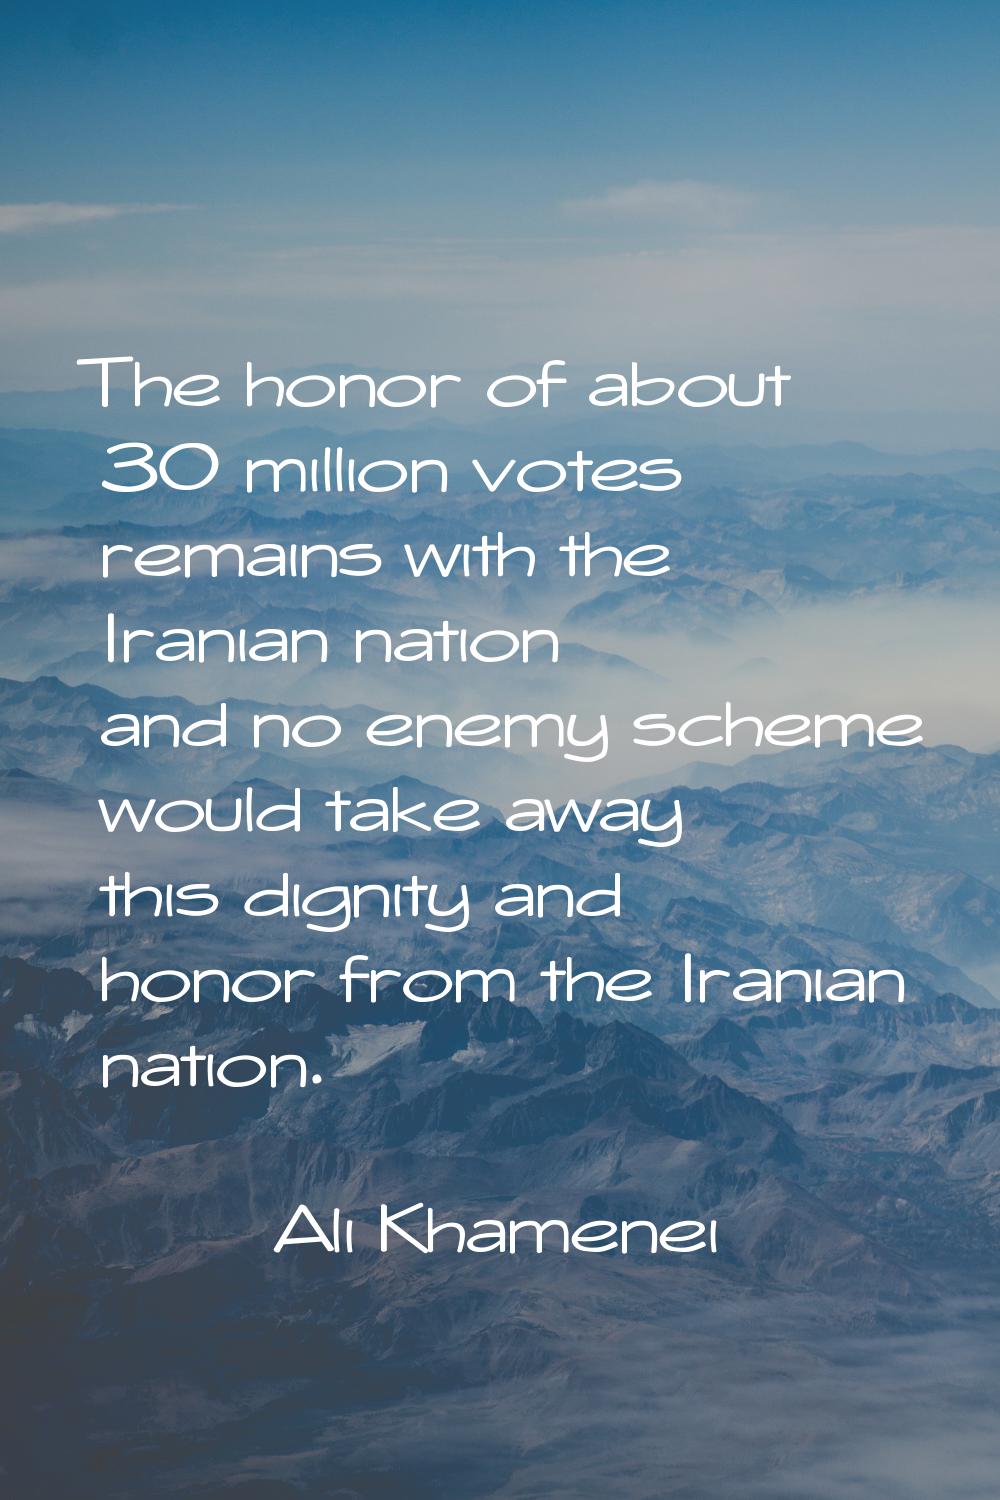 The honor of about 30 million votes remains with the Iranian nation and no enemy scheme would take 